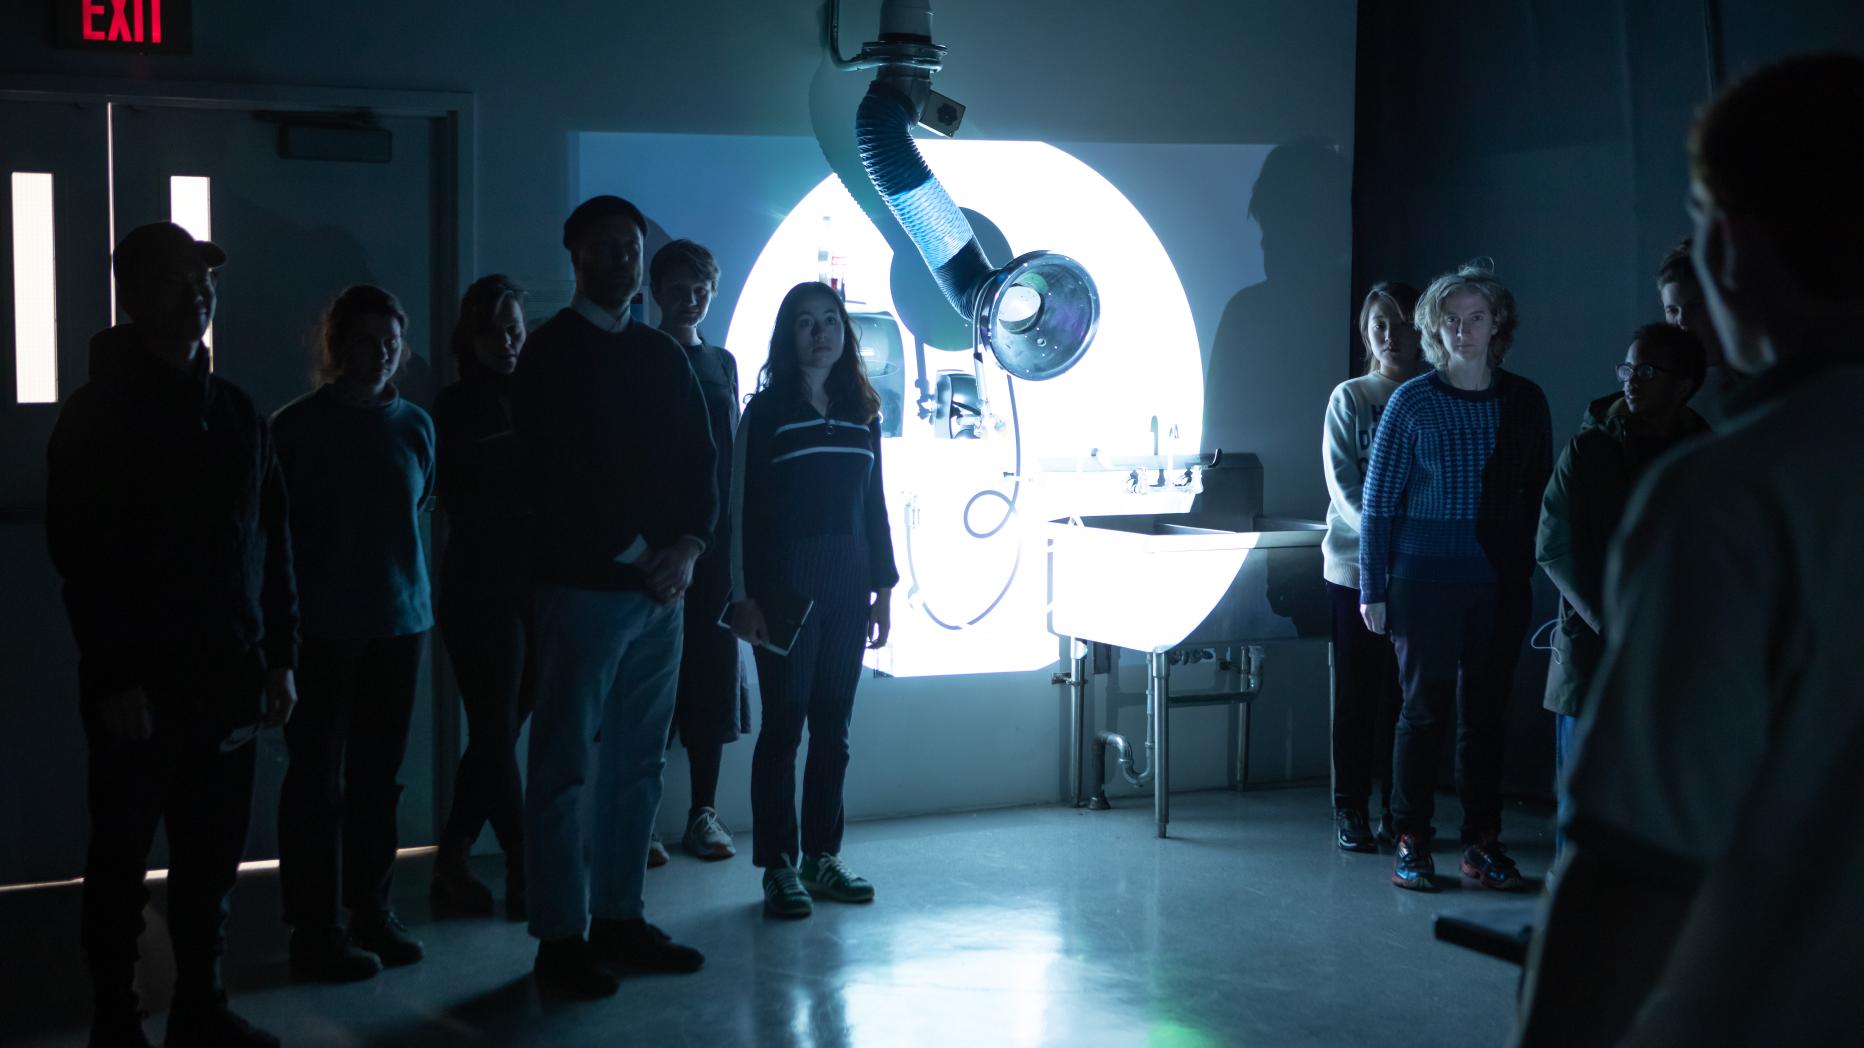 People standing in a darkened classroom with illuminated circle on wall behind them